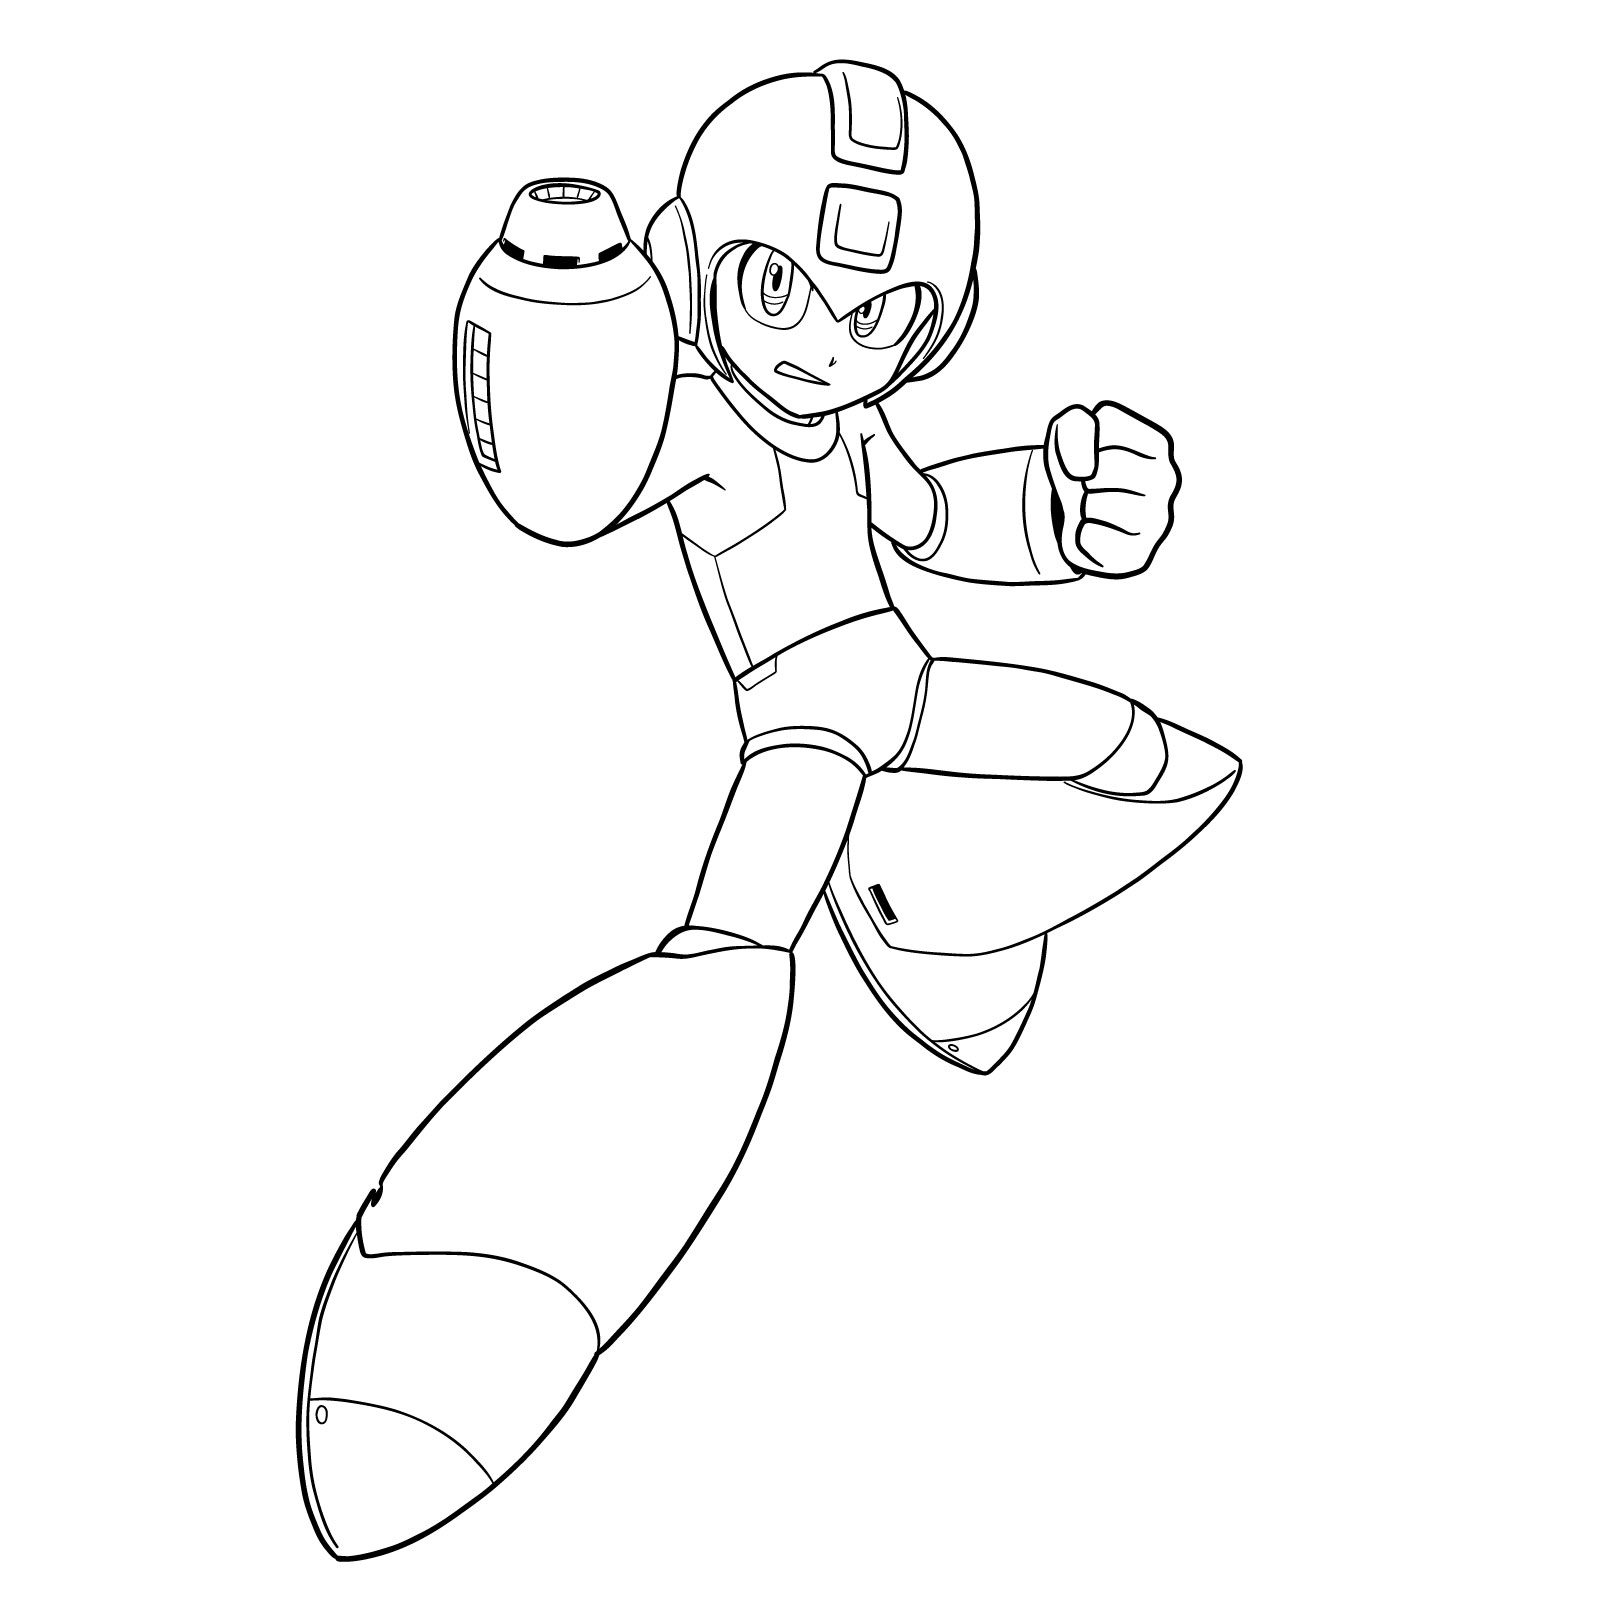 How to draw Mega Man from the 11th game - final step